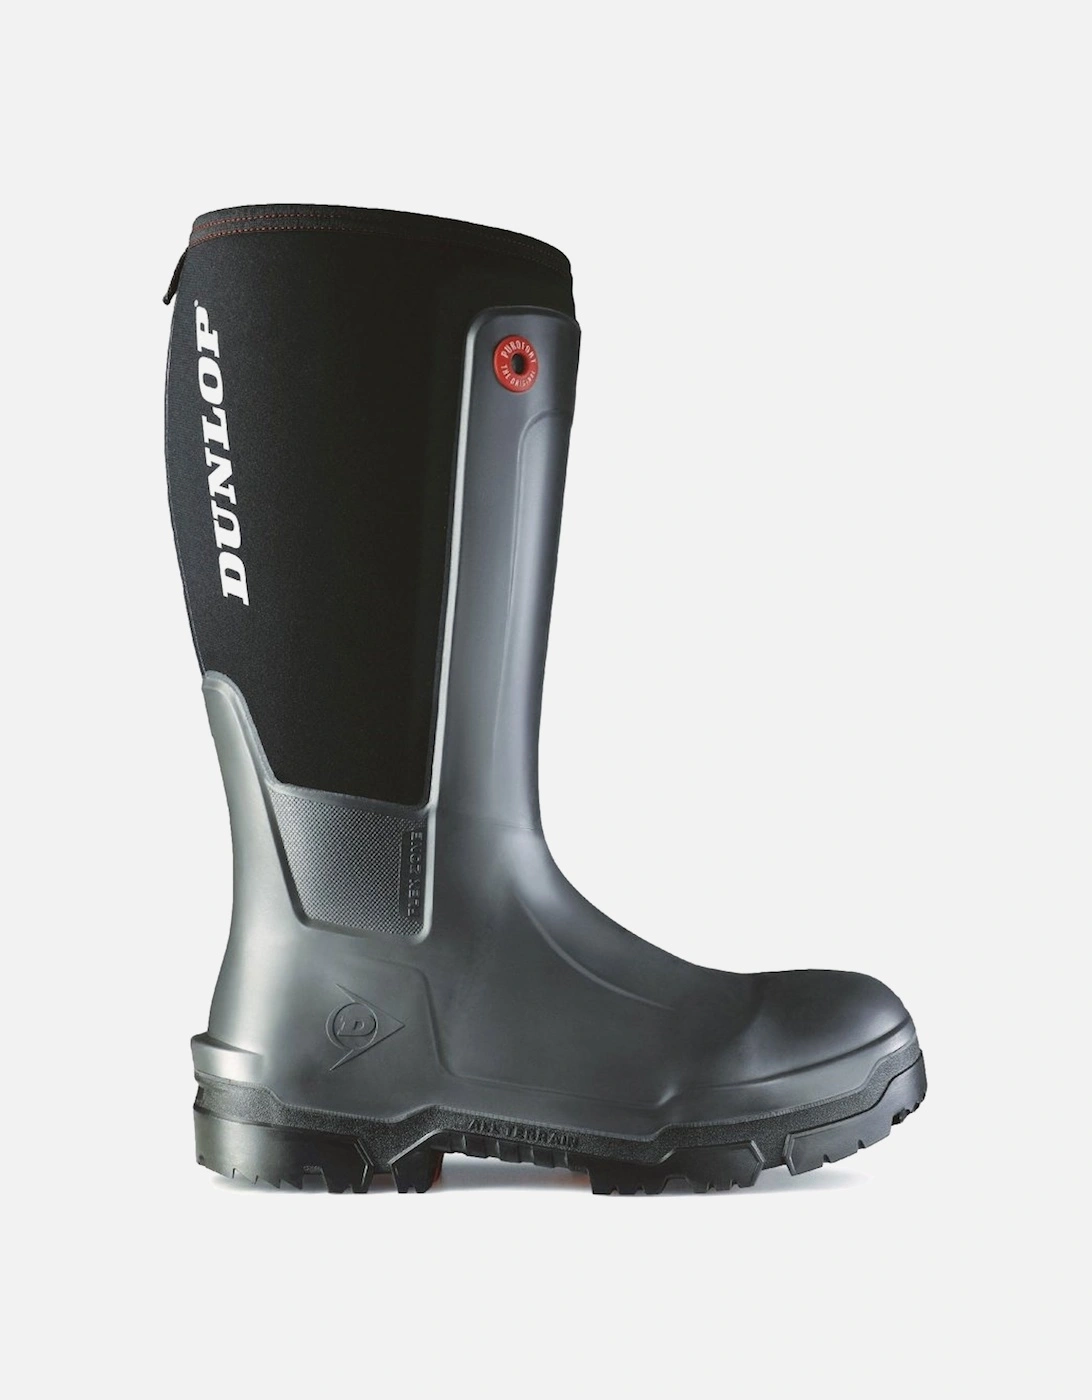 Snugboot Work P Safety Mens Wellingtons